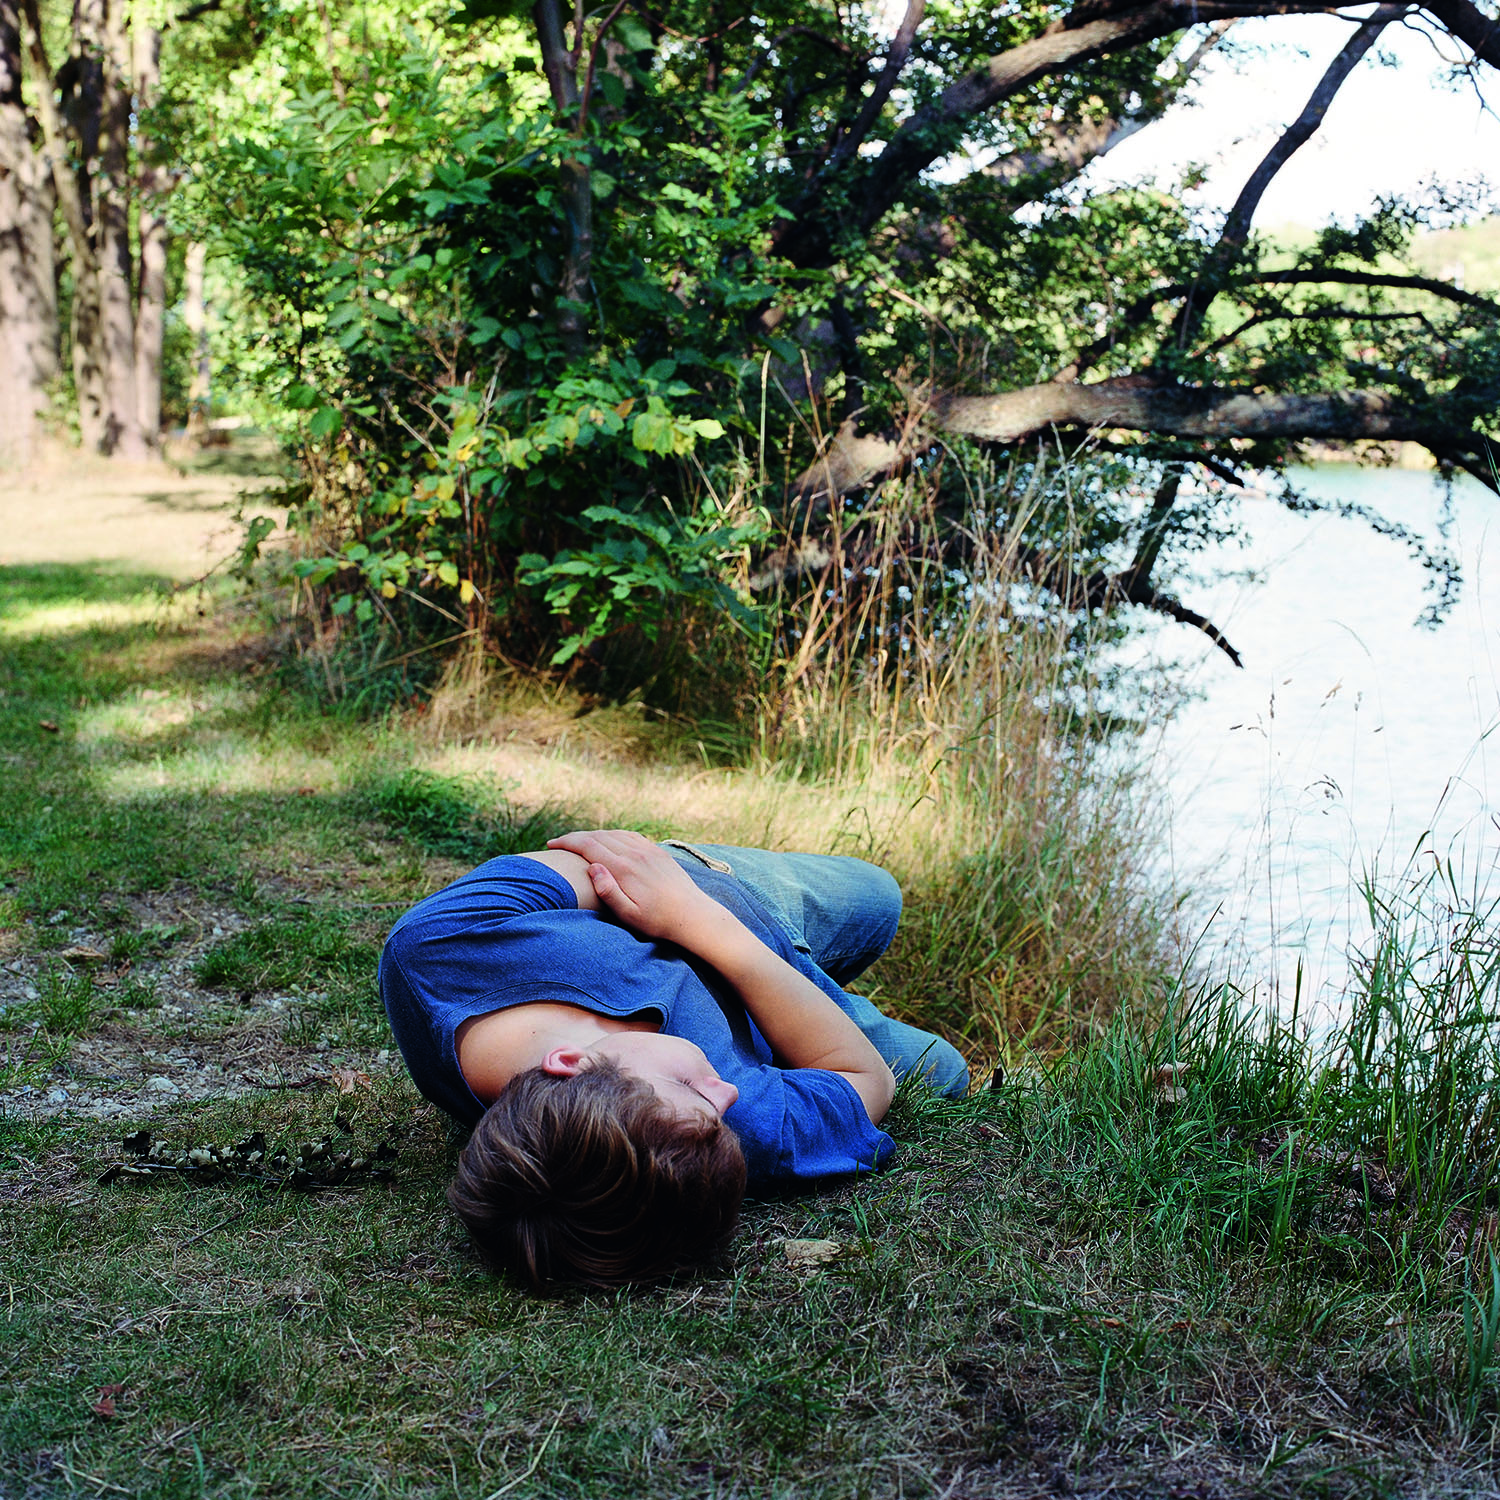 Rasmus by the river, 2012